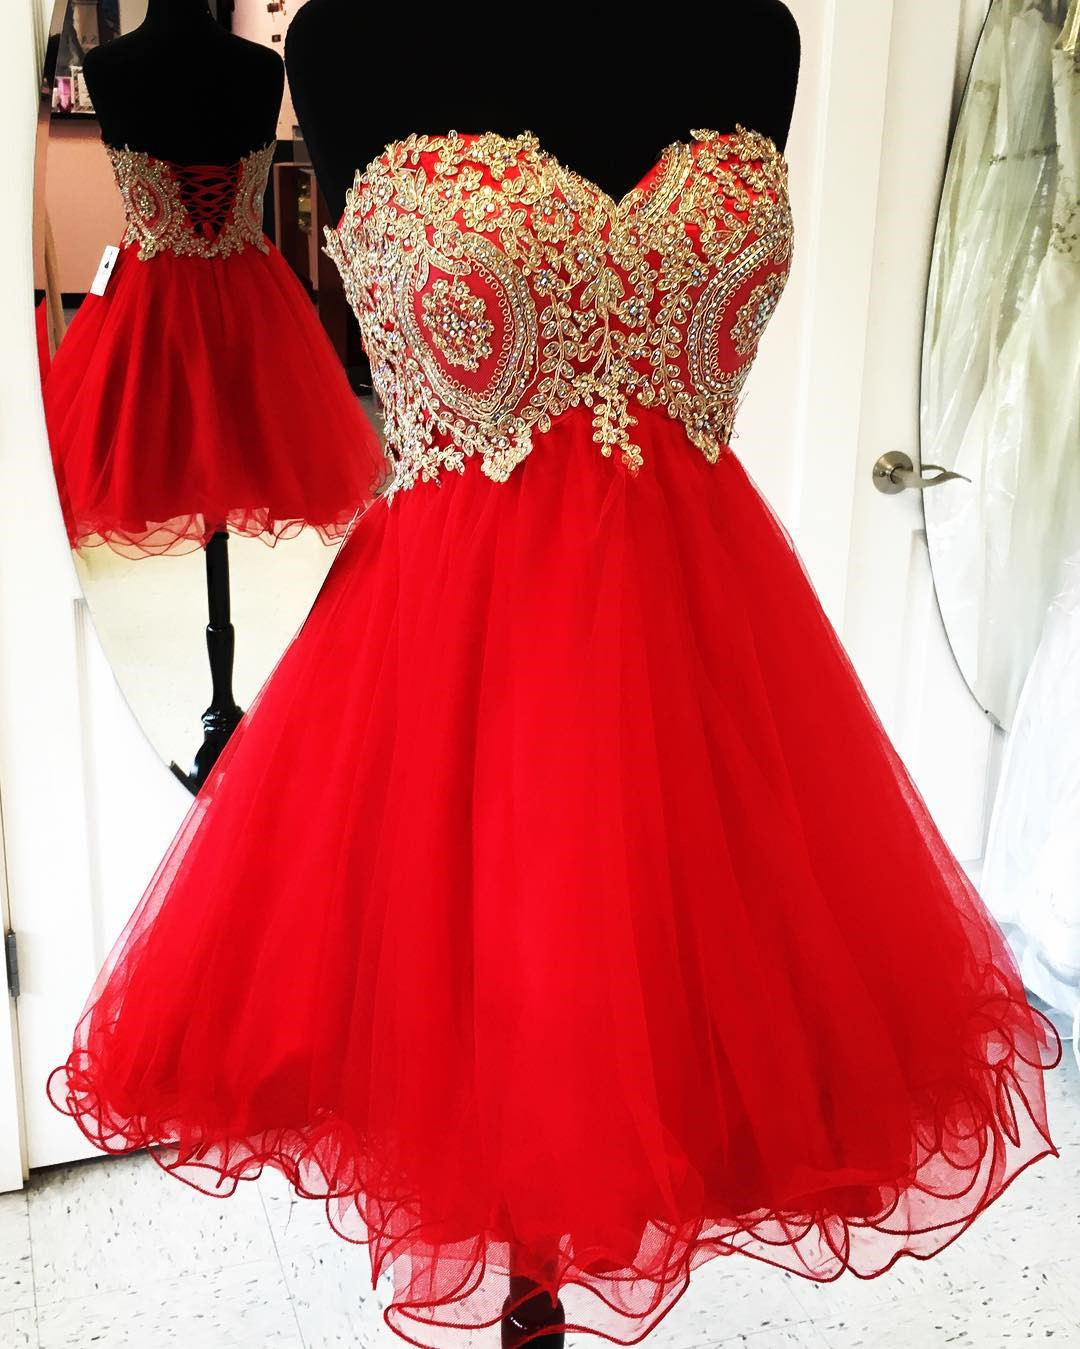 Gold Lace Appliques Short Red Homecoming Dresses 2017 Cocktail Party Dress,graduation Dresses,short Prom Gowns